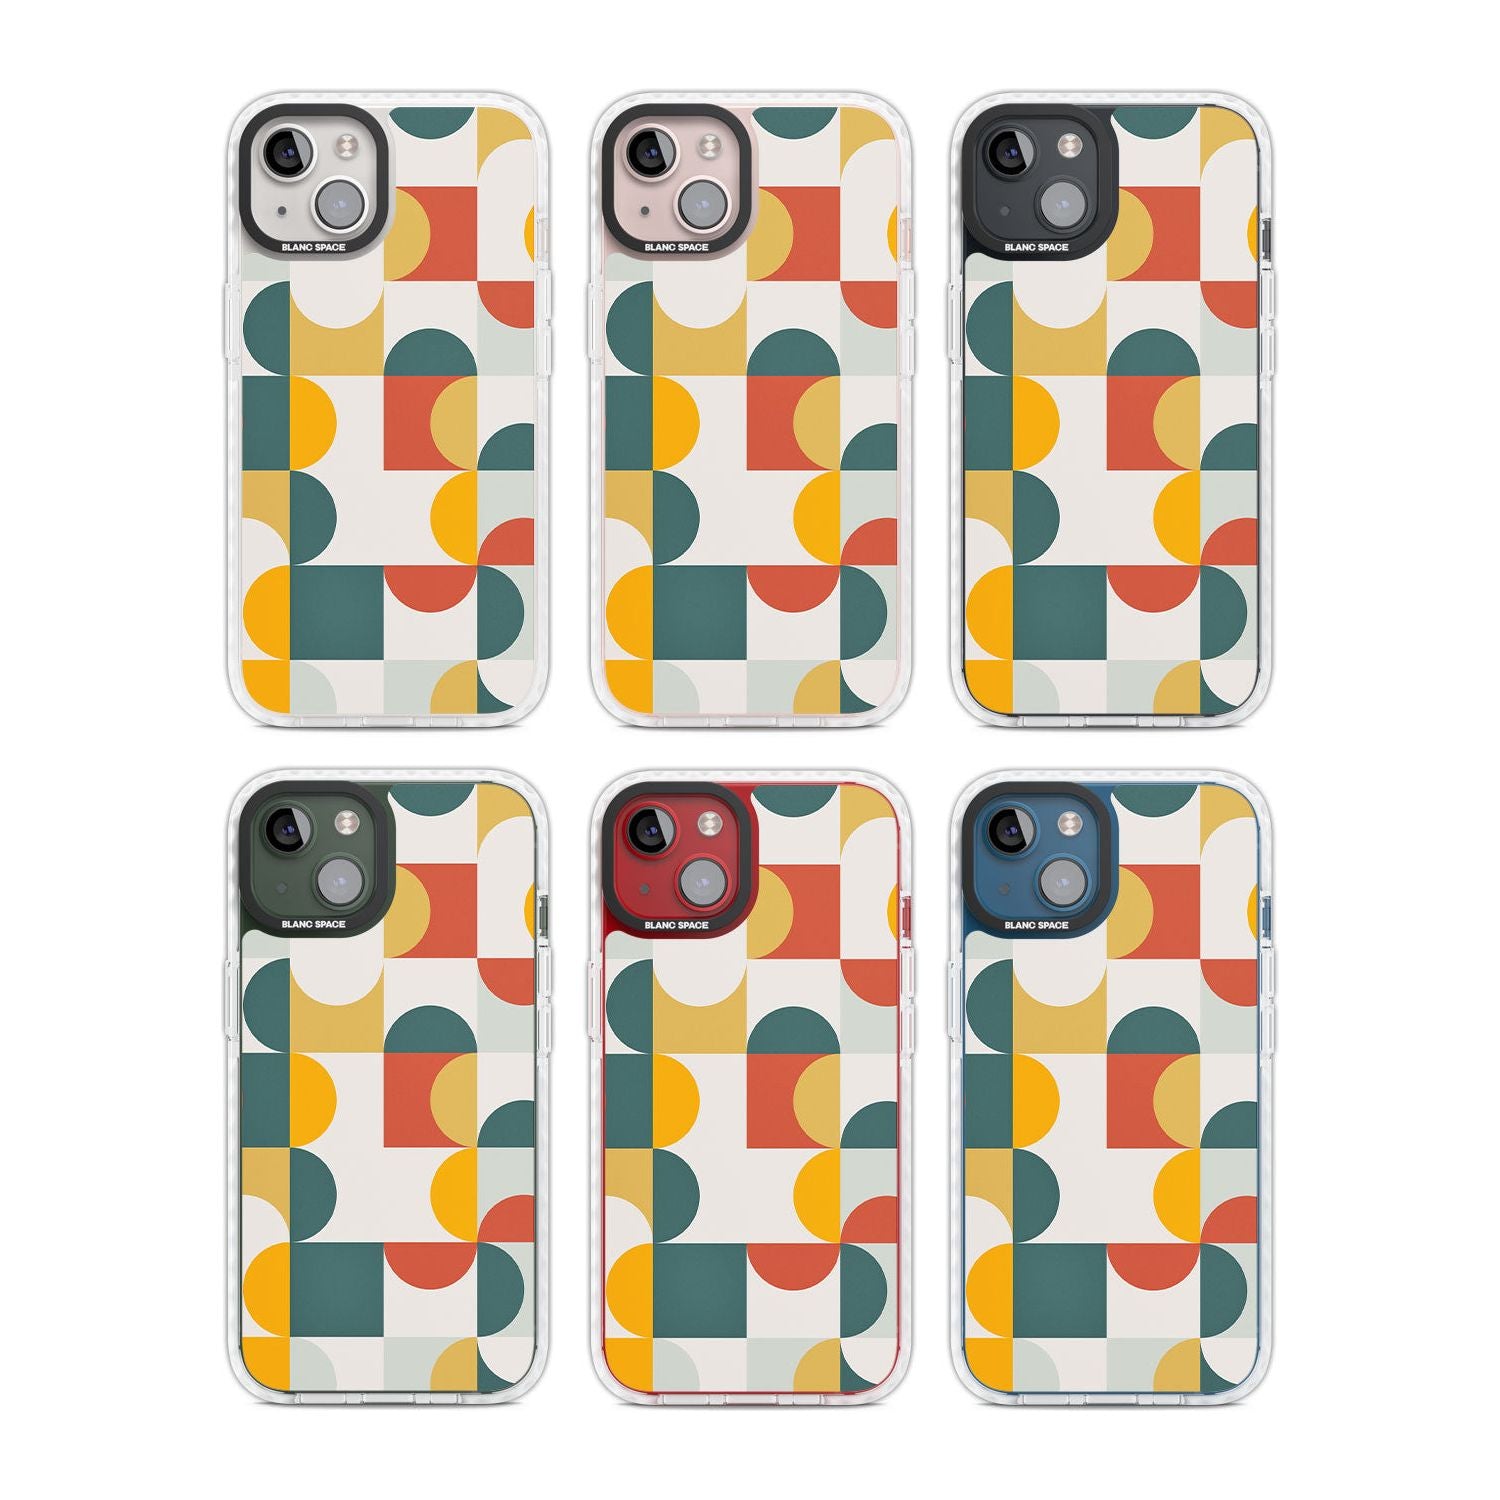 Abstract Retro Shapes: Muted Colour Mix Phone Case iPhone 15 Pro Max / Black Impact Case,iPhone 15 Plus / Black Impact Case,iPhone 15 Pro / Black Impact Case,iPhone 15 / Black Impact Case,iPhone 15 Pro Max / Impact Case,iPhone 15 Plus / Impact Case,iPhone 15 Pro / Impact Case,iPhone 15 / Impact Case,iPhone 15 Pro Max / Magsafe Black Impact Case,iPhone 15 Plus / Magsafe Black Impact Case,iPhone 15 Pro / Magsafe Black Impact Case,iPhone 15 / Magsafe Black Impact Case,iPhone 14 Pro Max / Black Impact Case,iPho